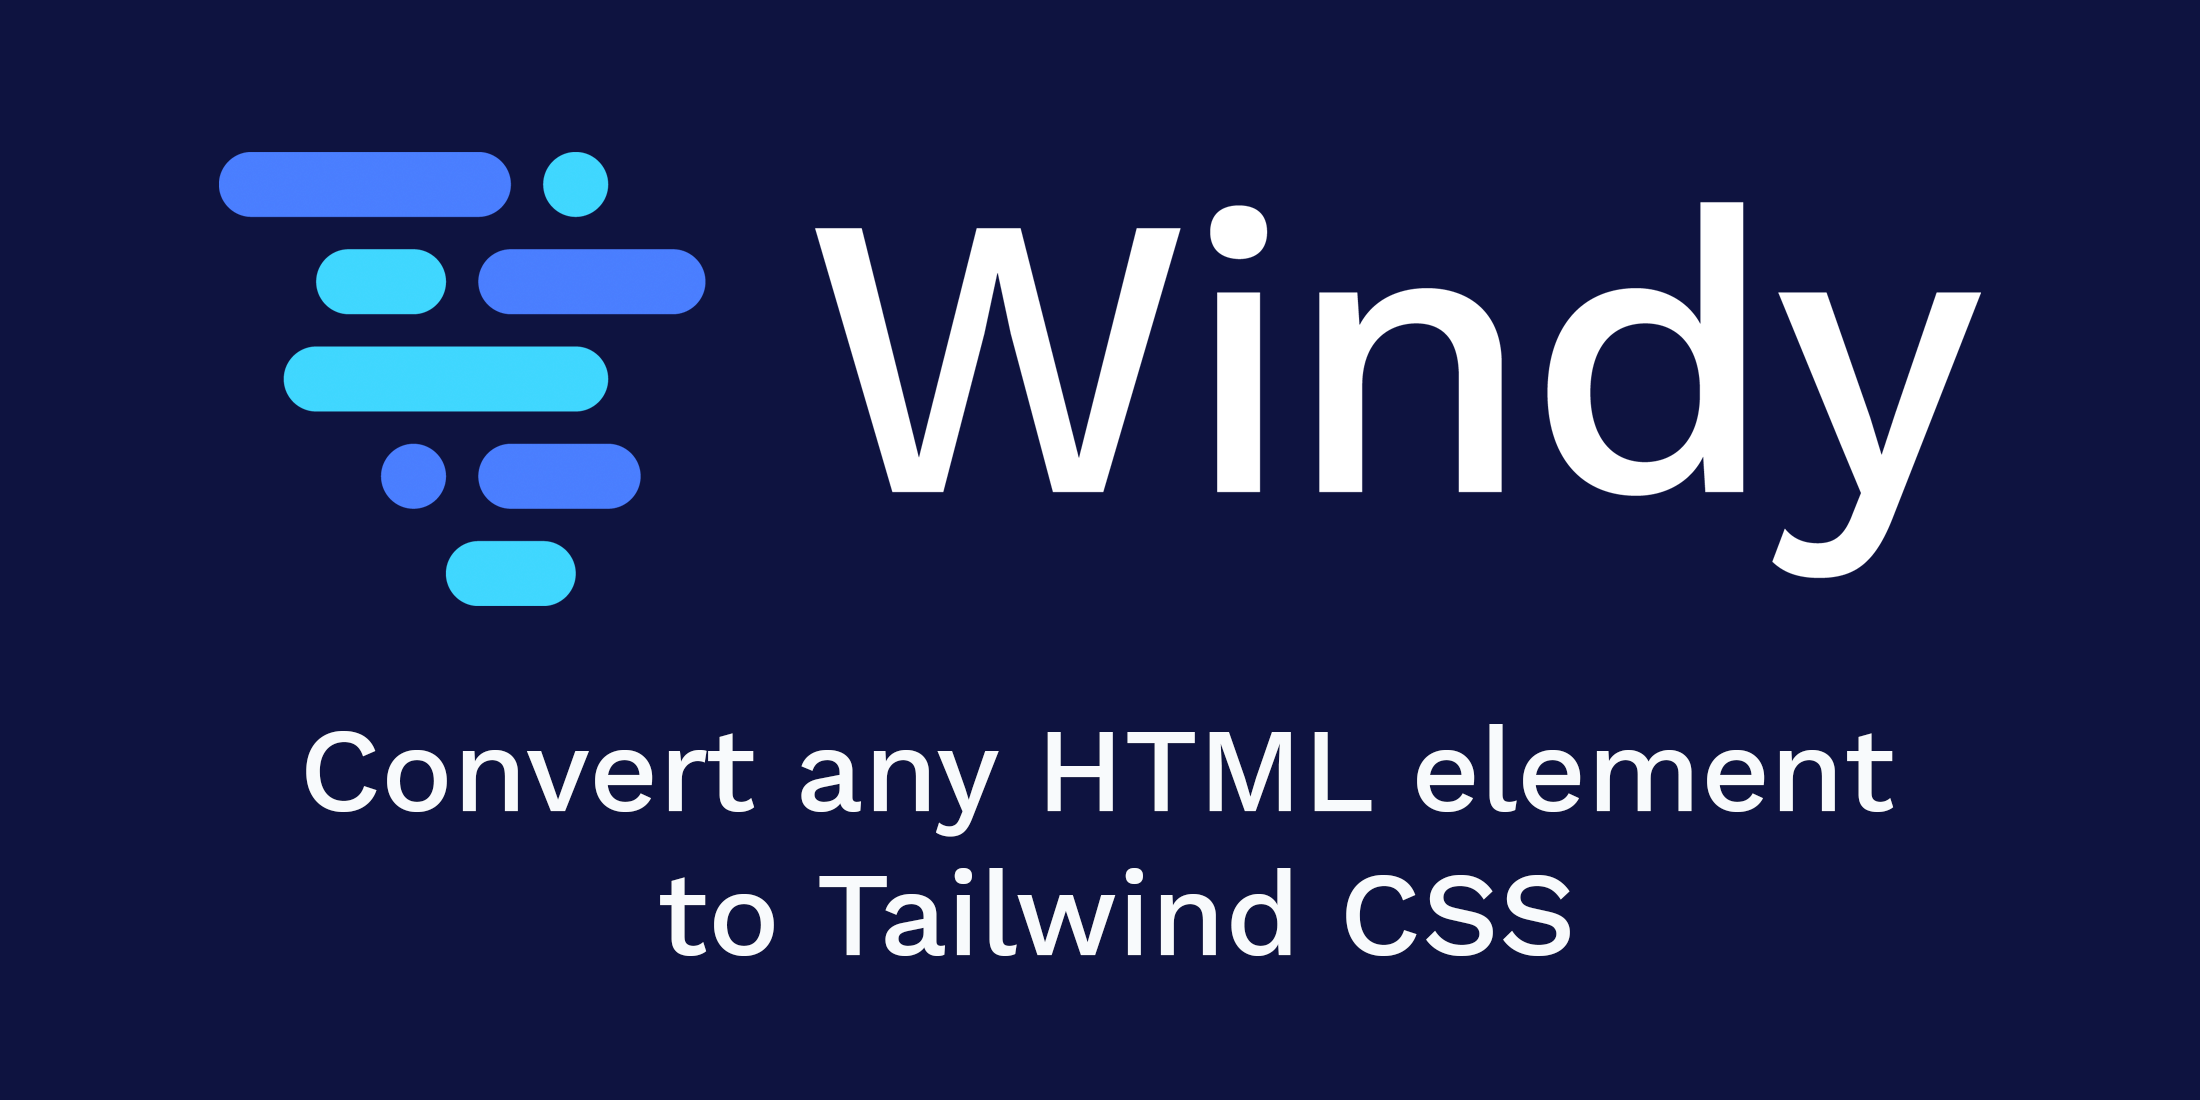 Convert any HTML element to Tailwind CSS with Windy image